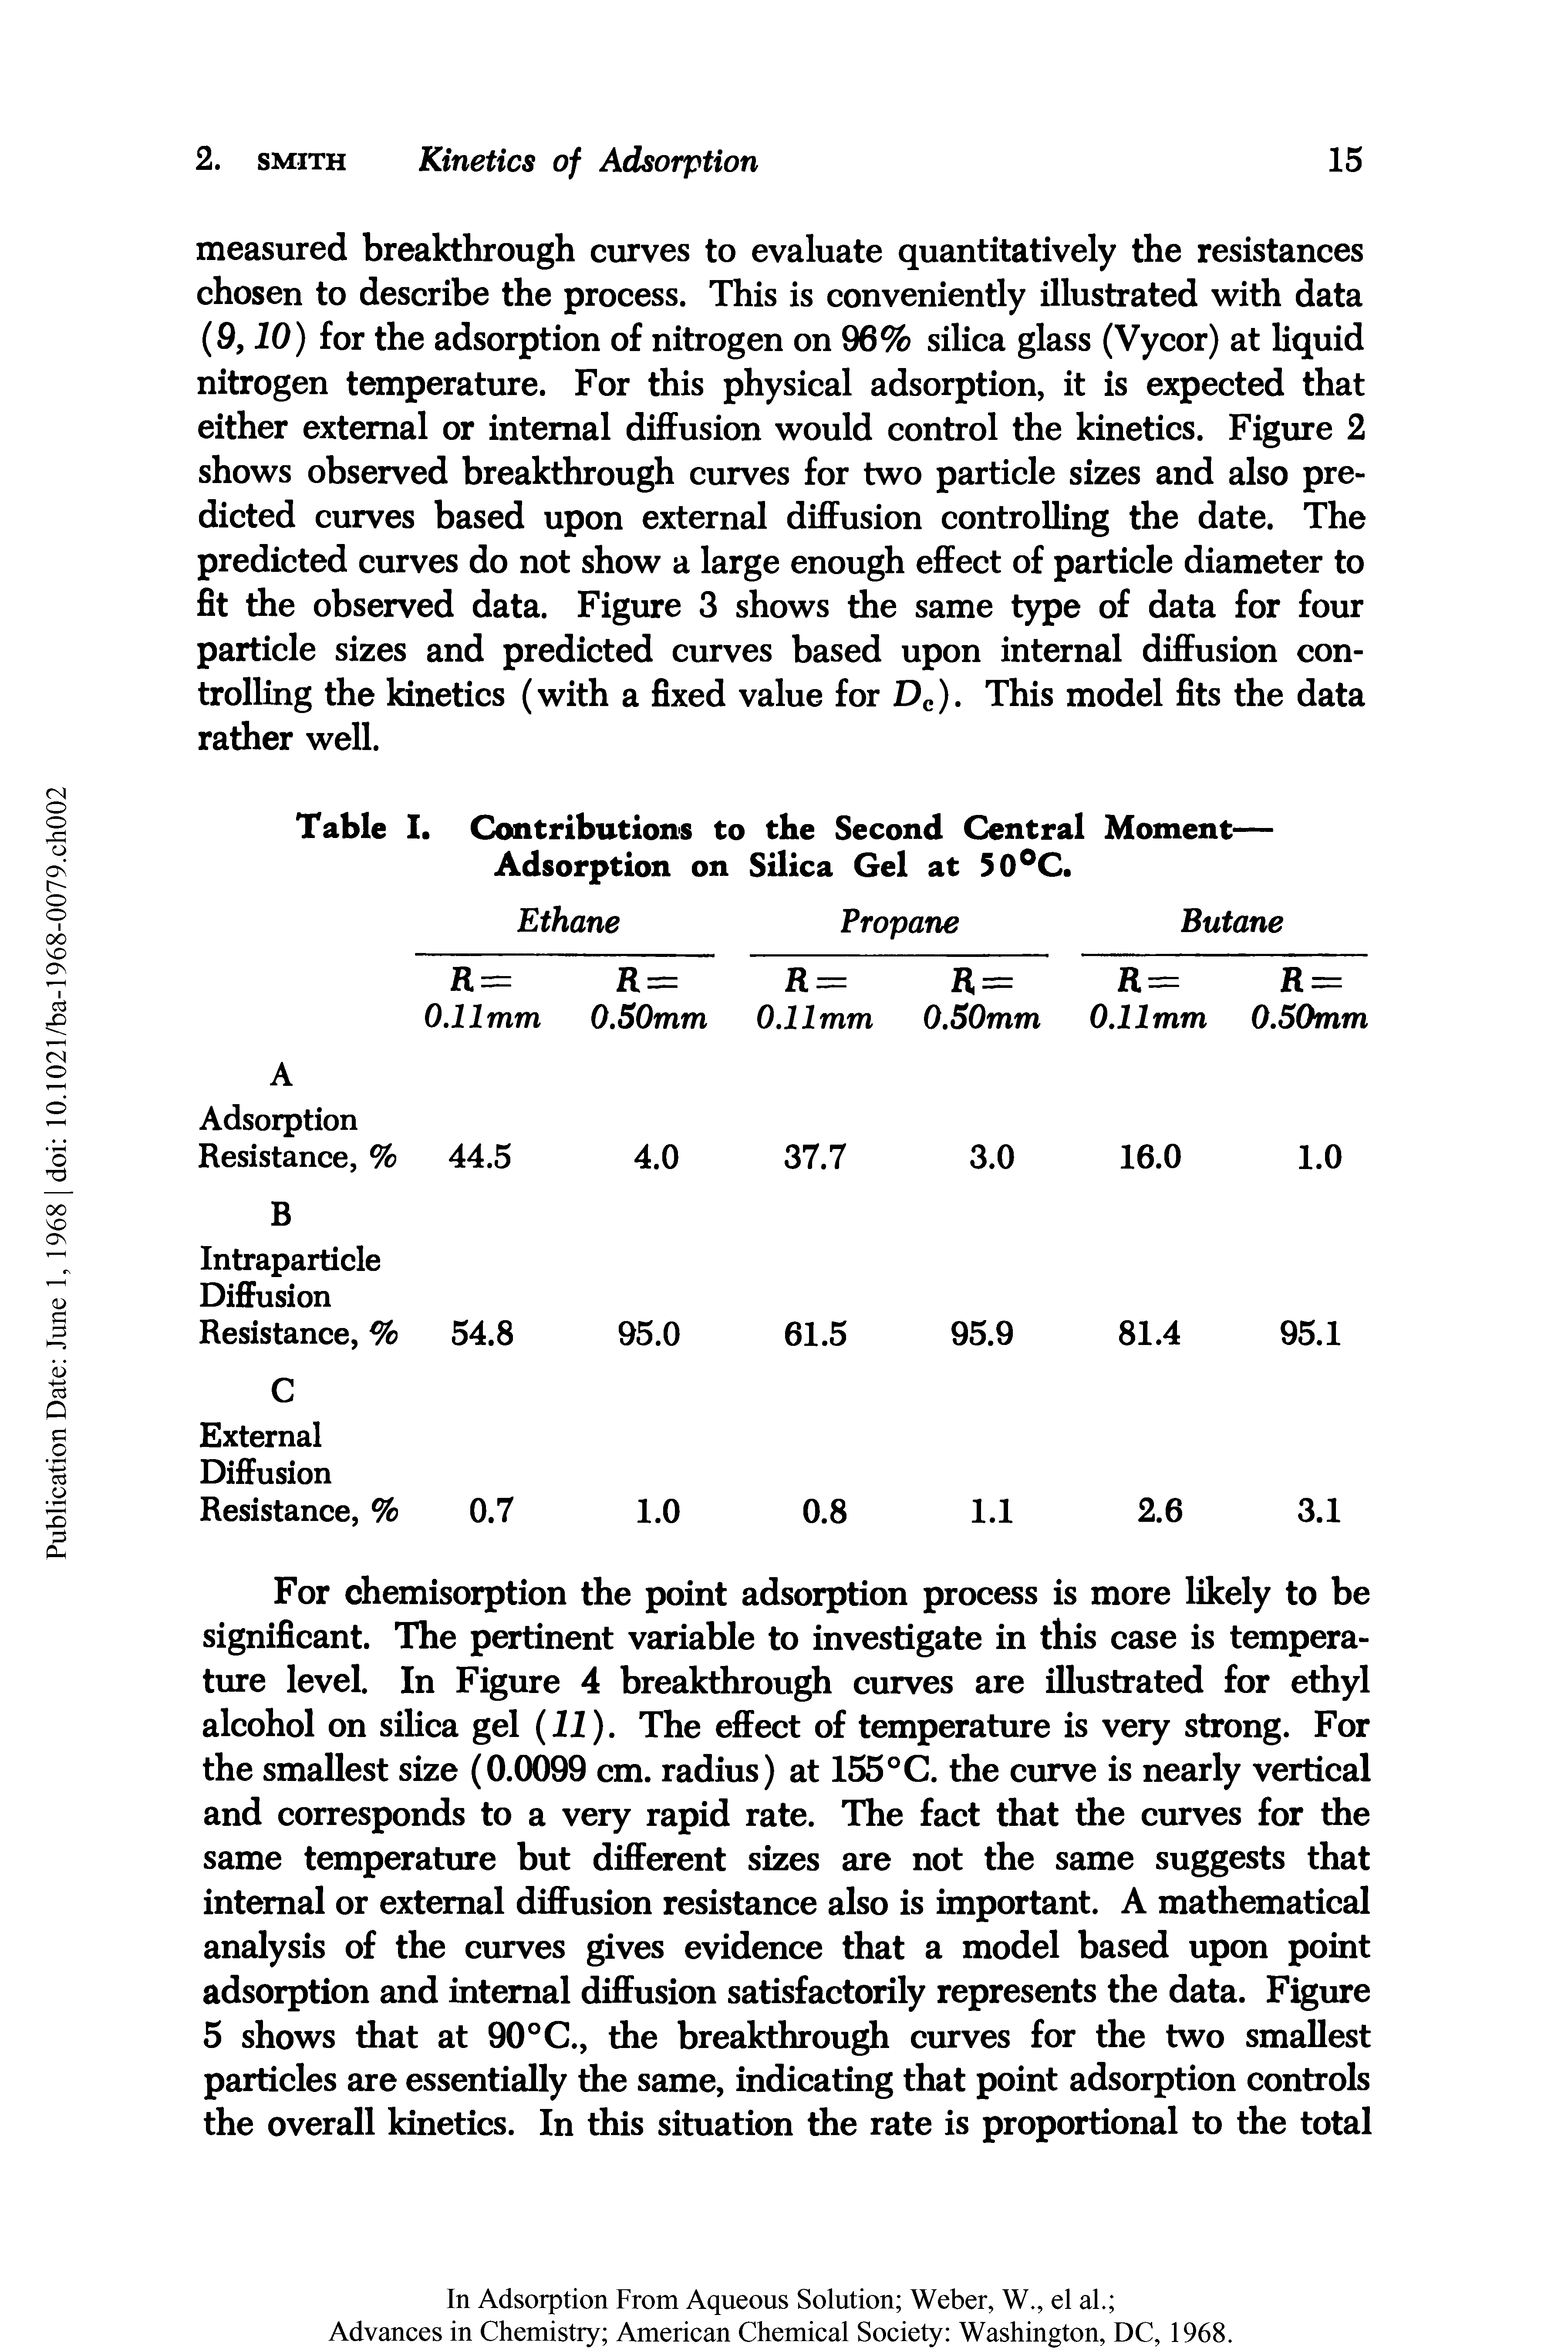 Table I. Contributions to the Second Central Moment— Adsorption on Silica Gel at 50°C.